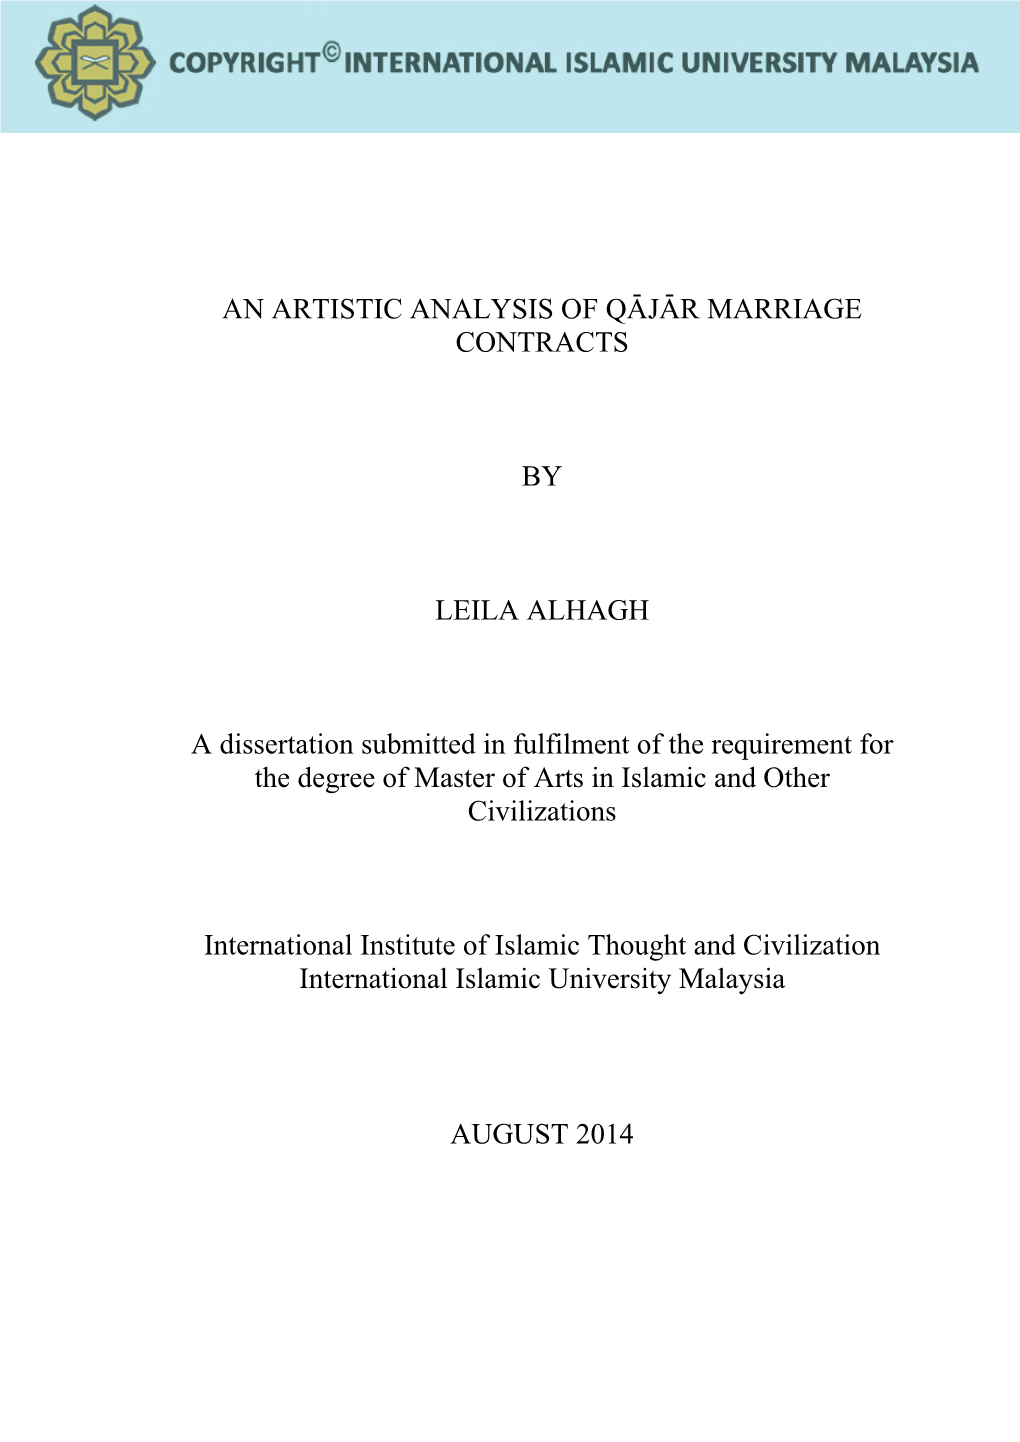 R Marriage Contracts by Leila Alhagh A